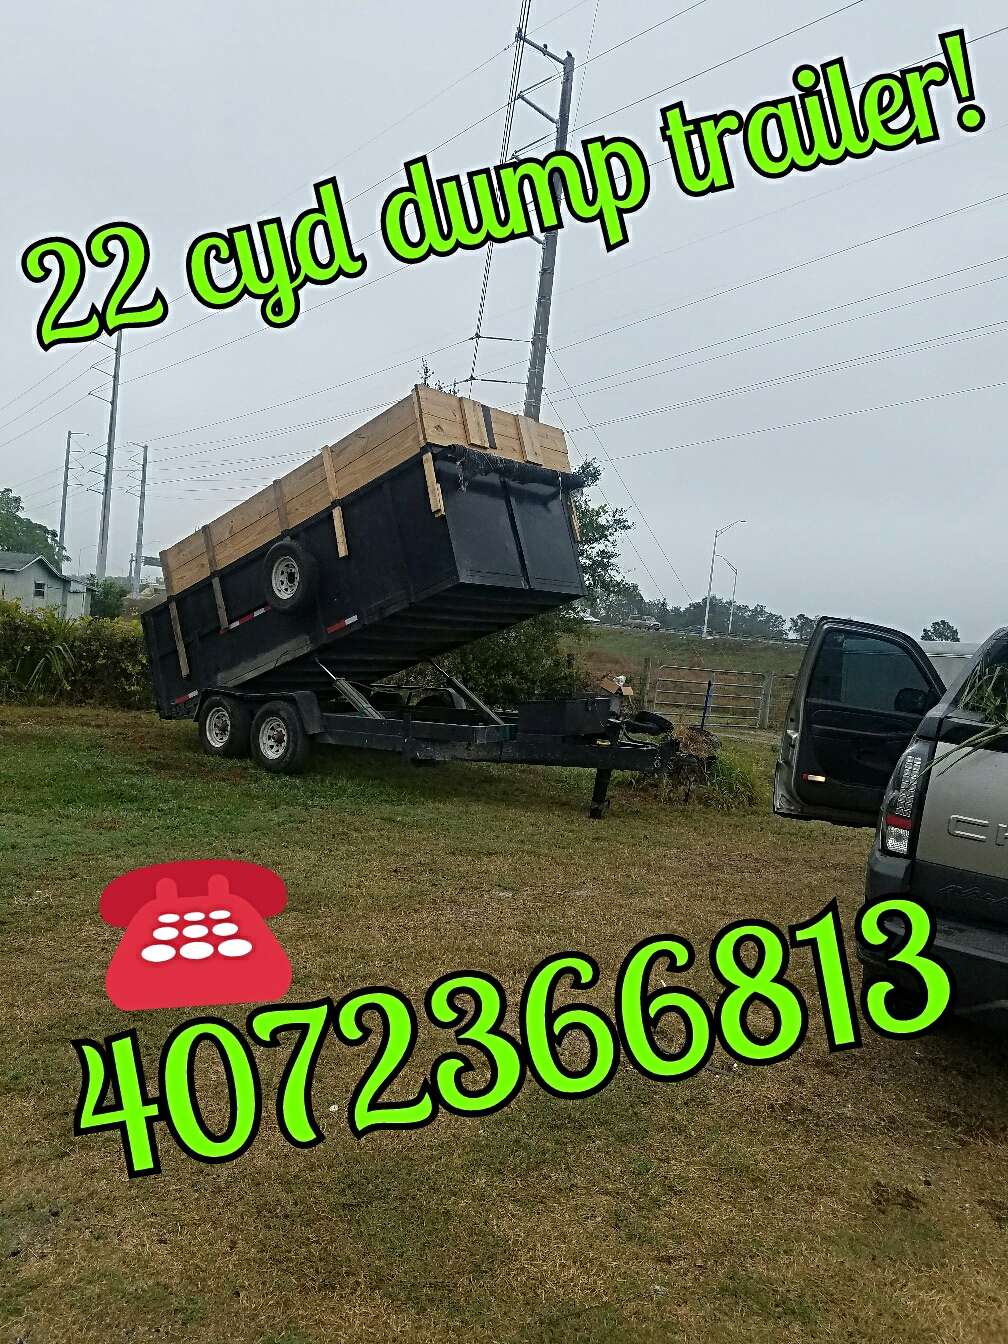 Dumpster You Fill I Spill LLC | Young Pine Rd, Orlando, FL 32829 | Phone: (407) 236-6813